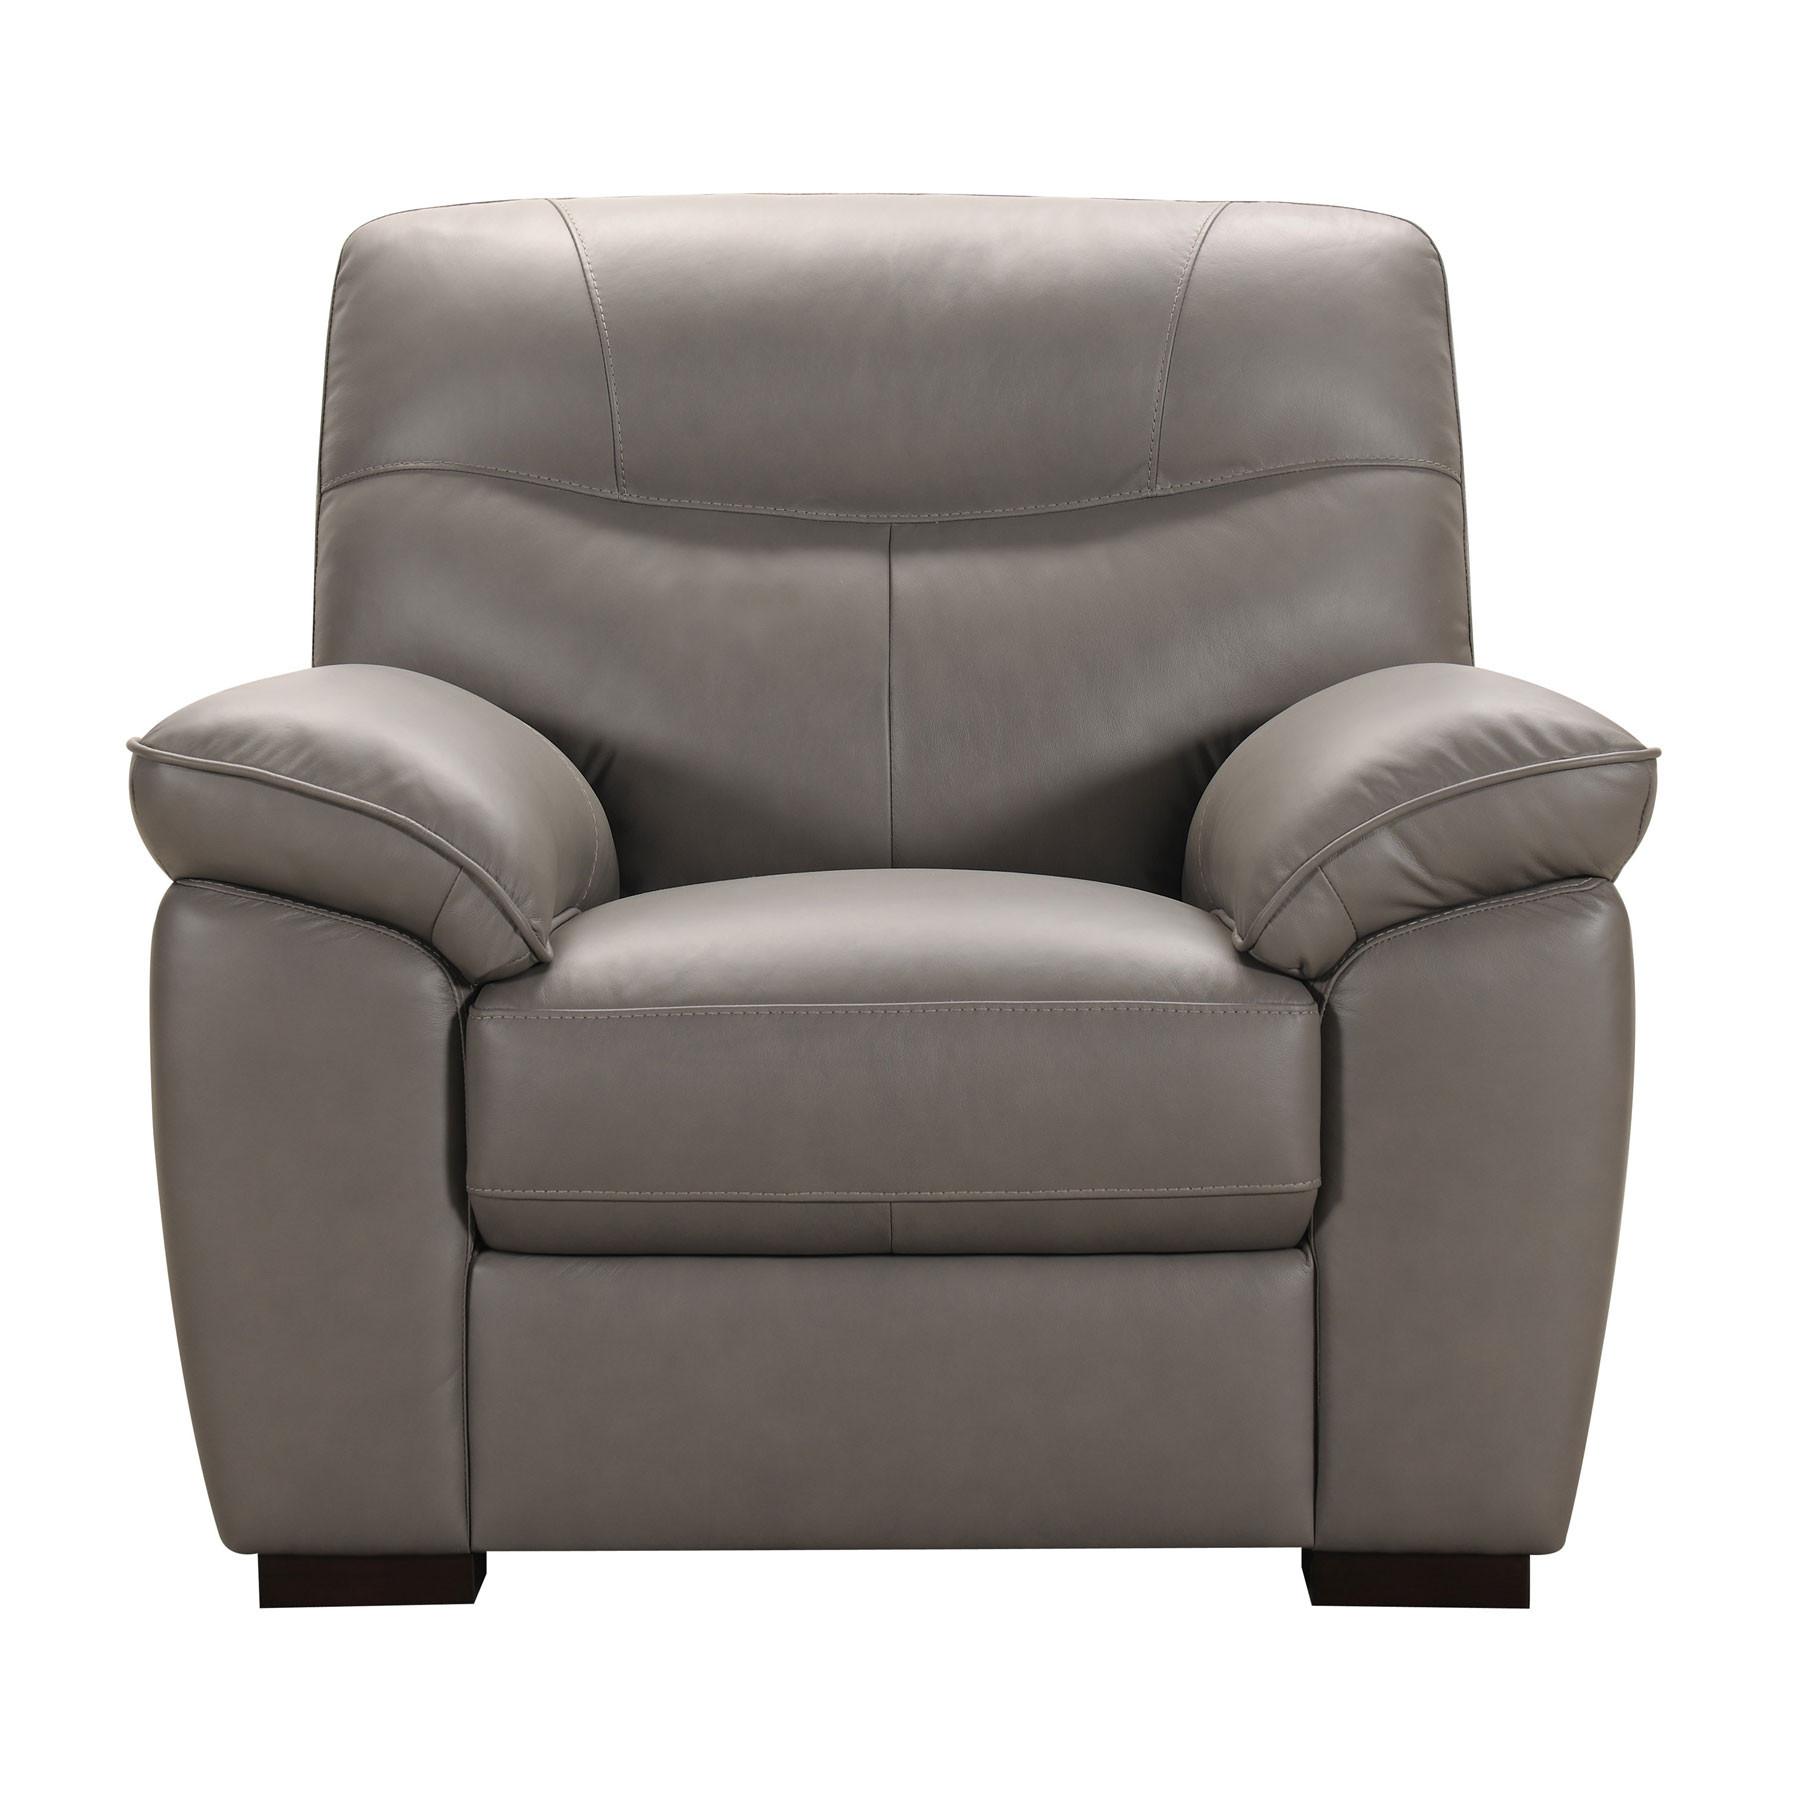 Andrea Grey Leather Armchair click. A